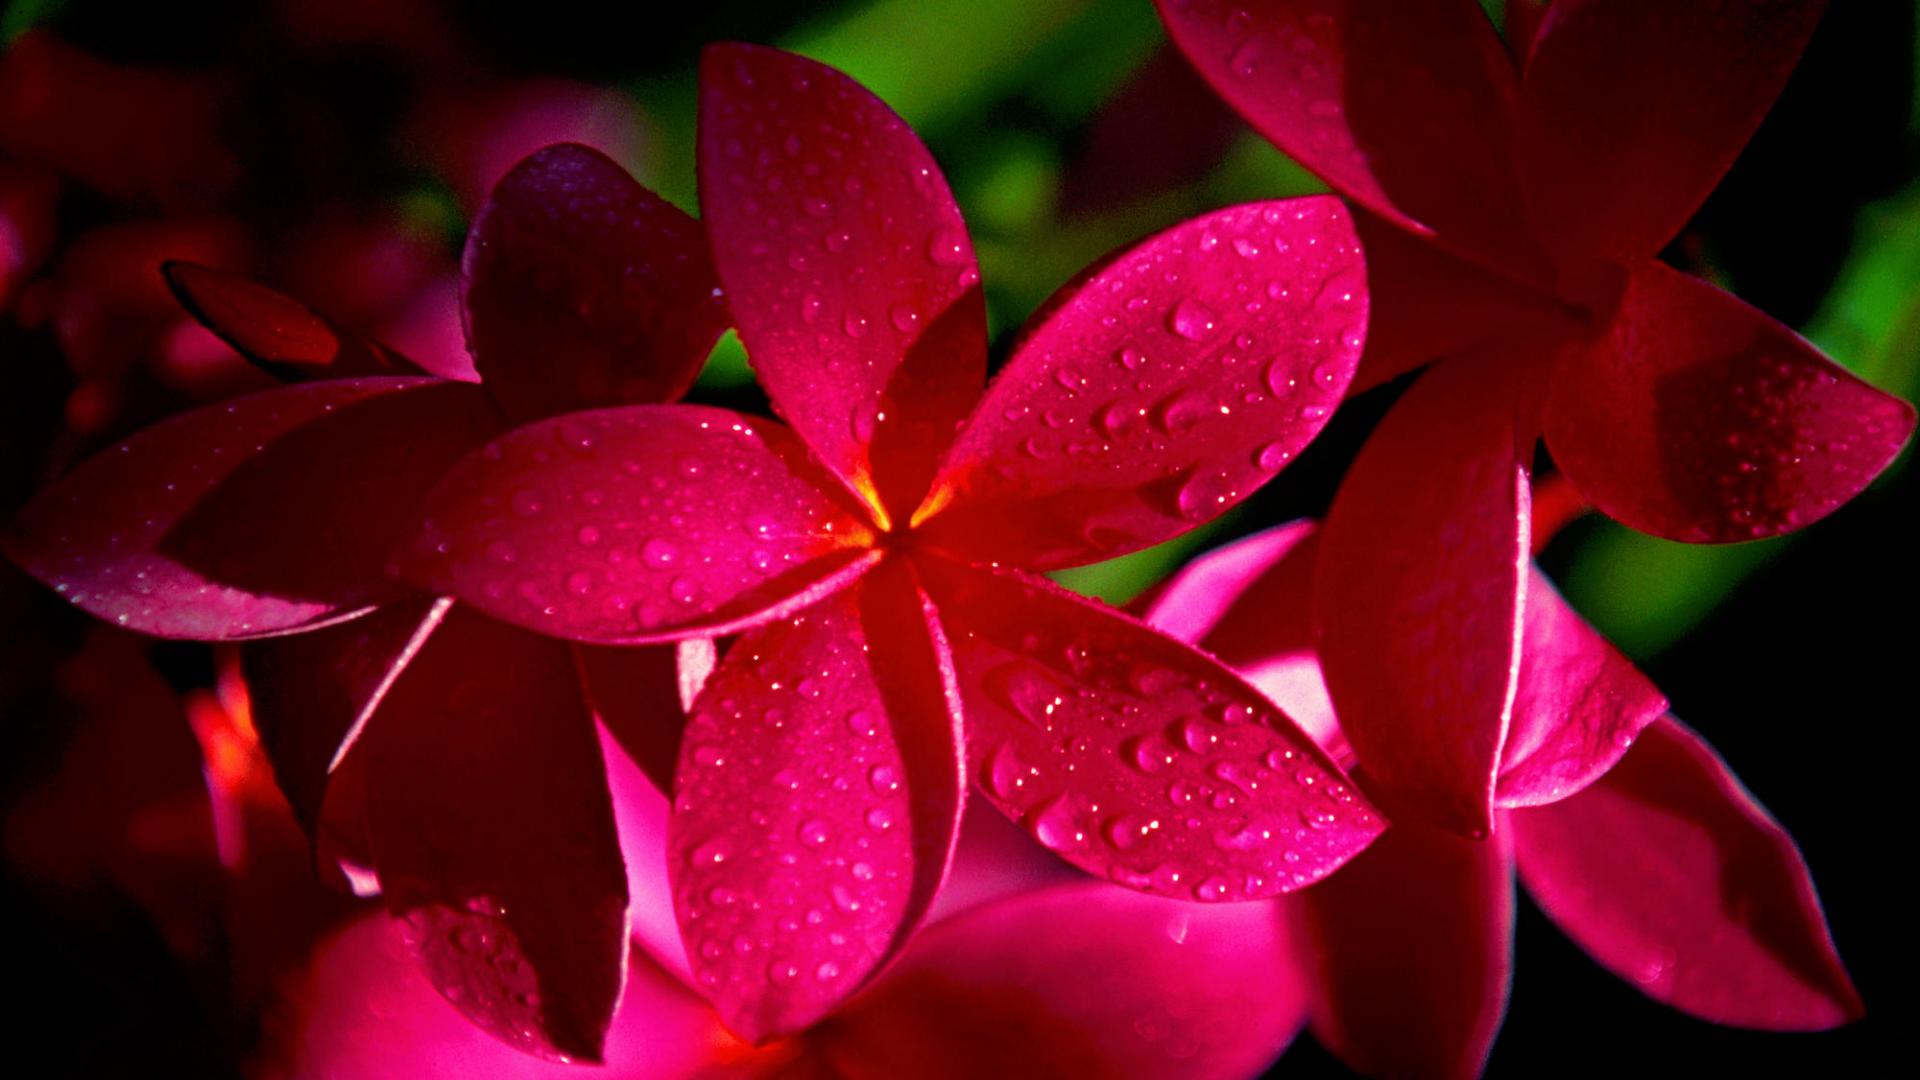 Pink Flower With Water Droplets